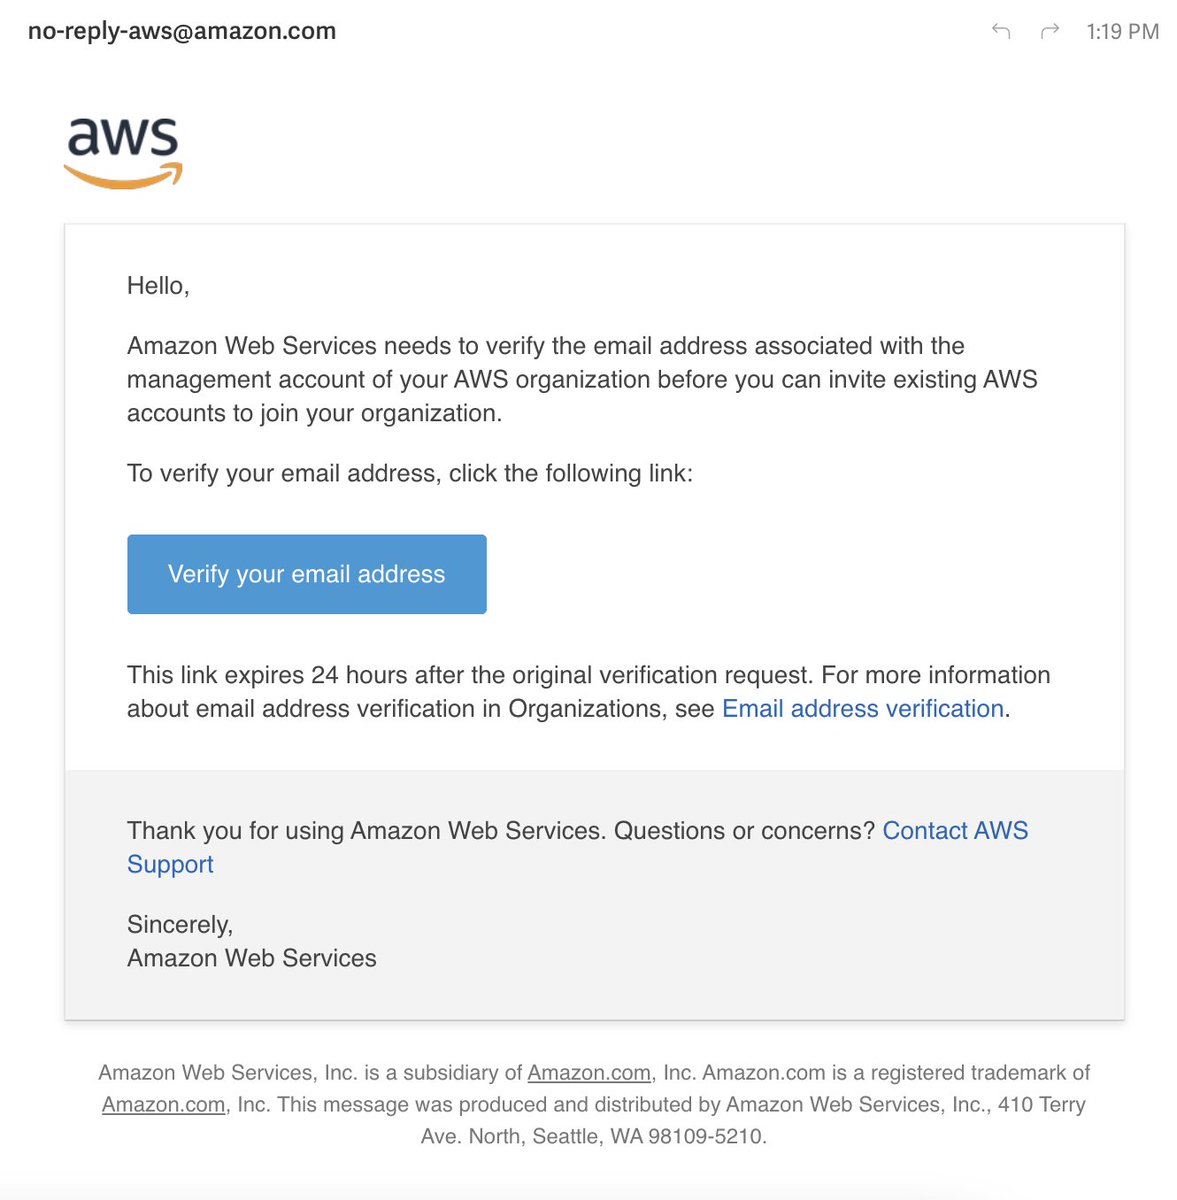 While I was marketing,  @awscloud was emailing. Unclear if this is a phishing attempt, from AWS, or a phishing attempt from AWS.